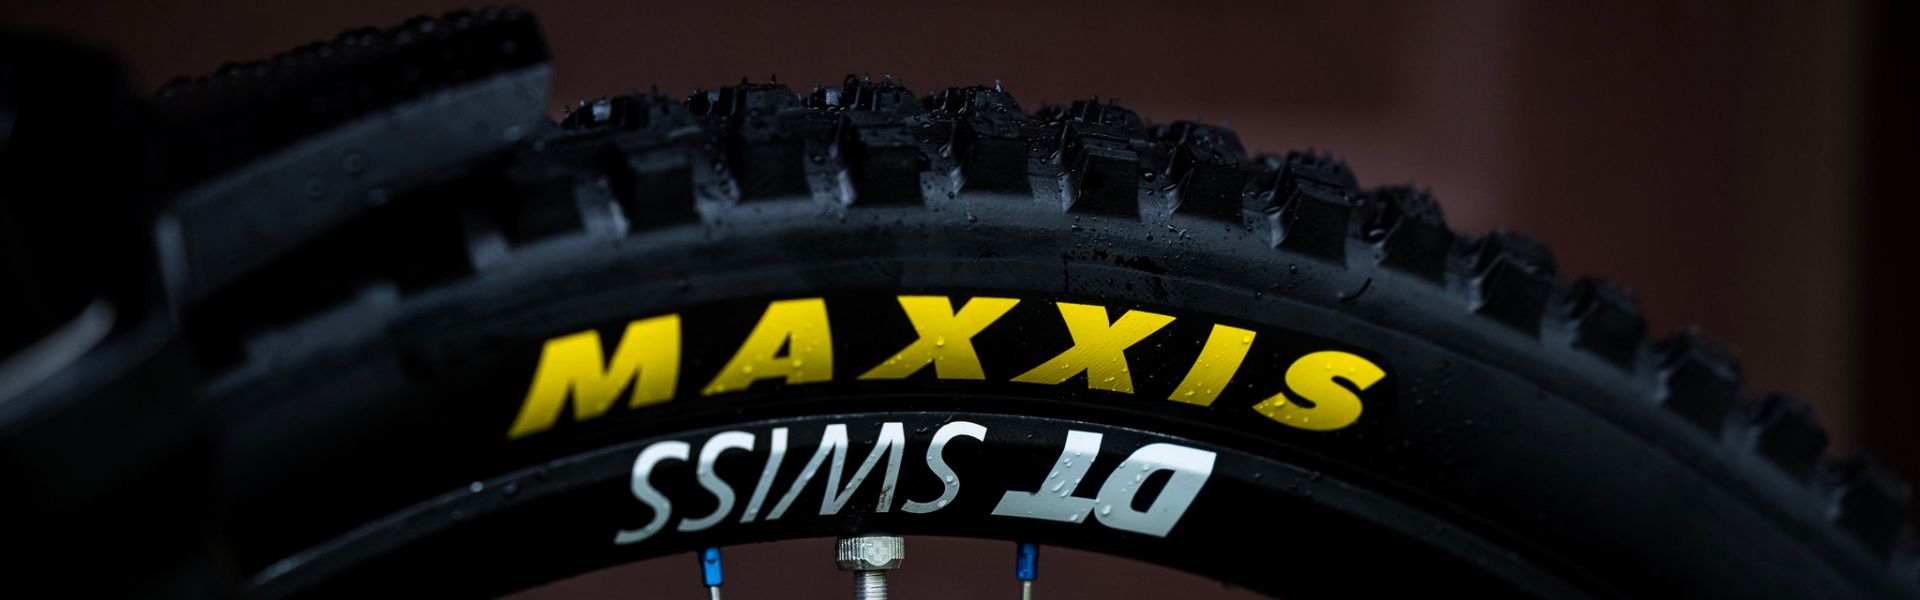 Shop the best Maxxis bike tires